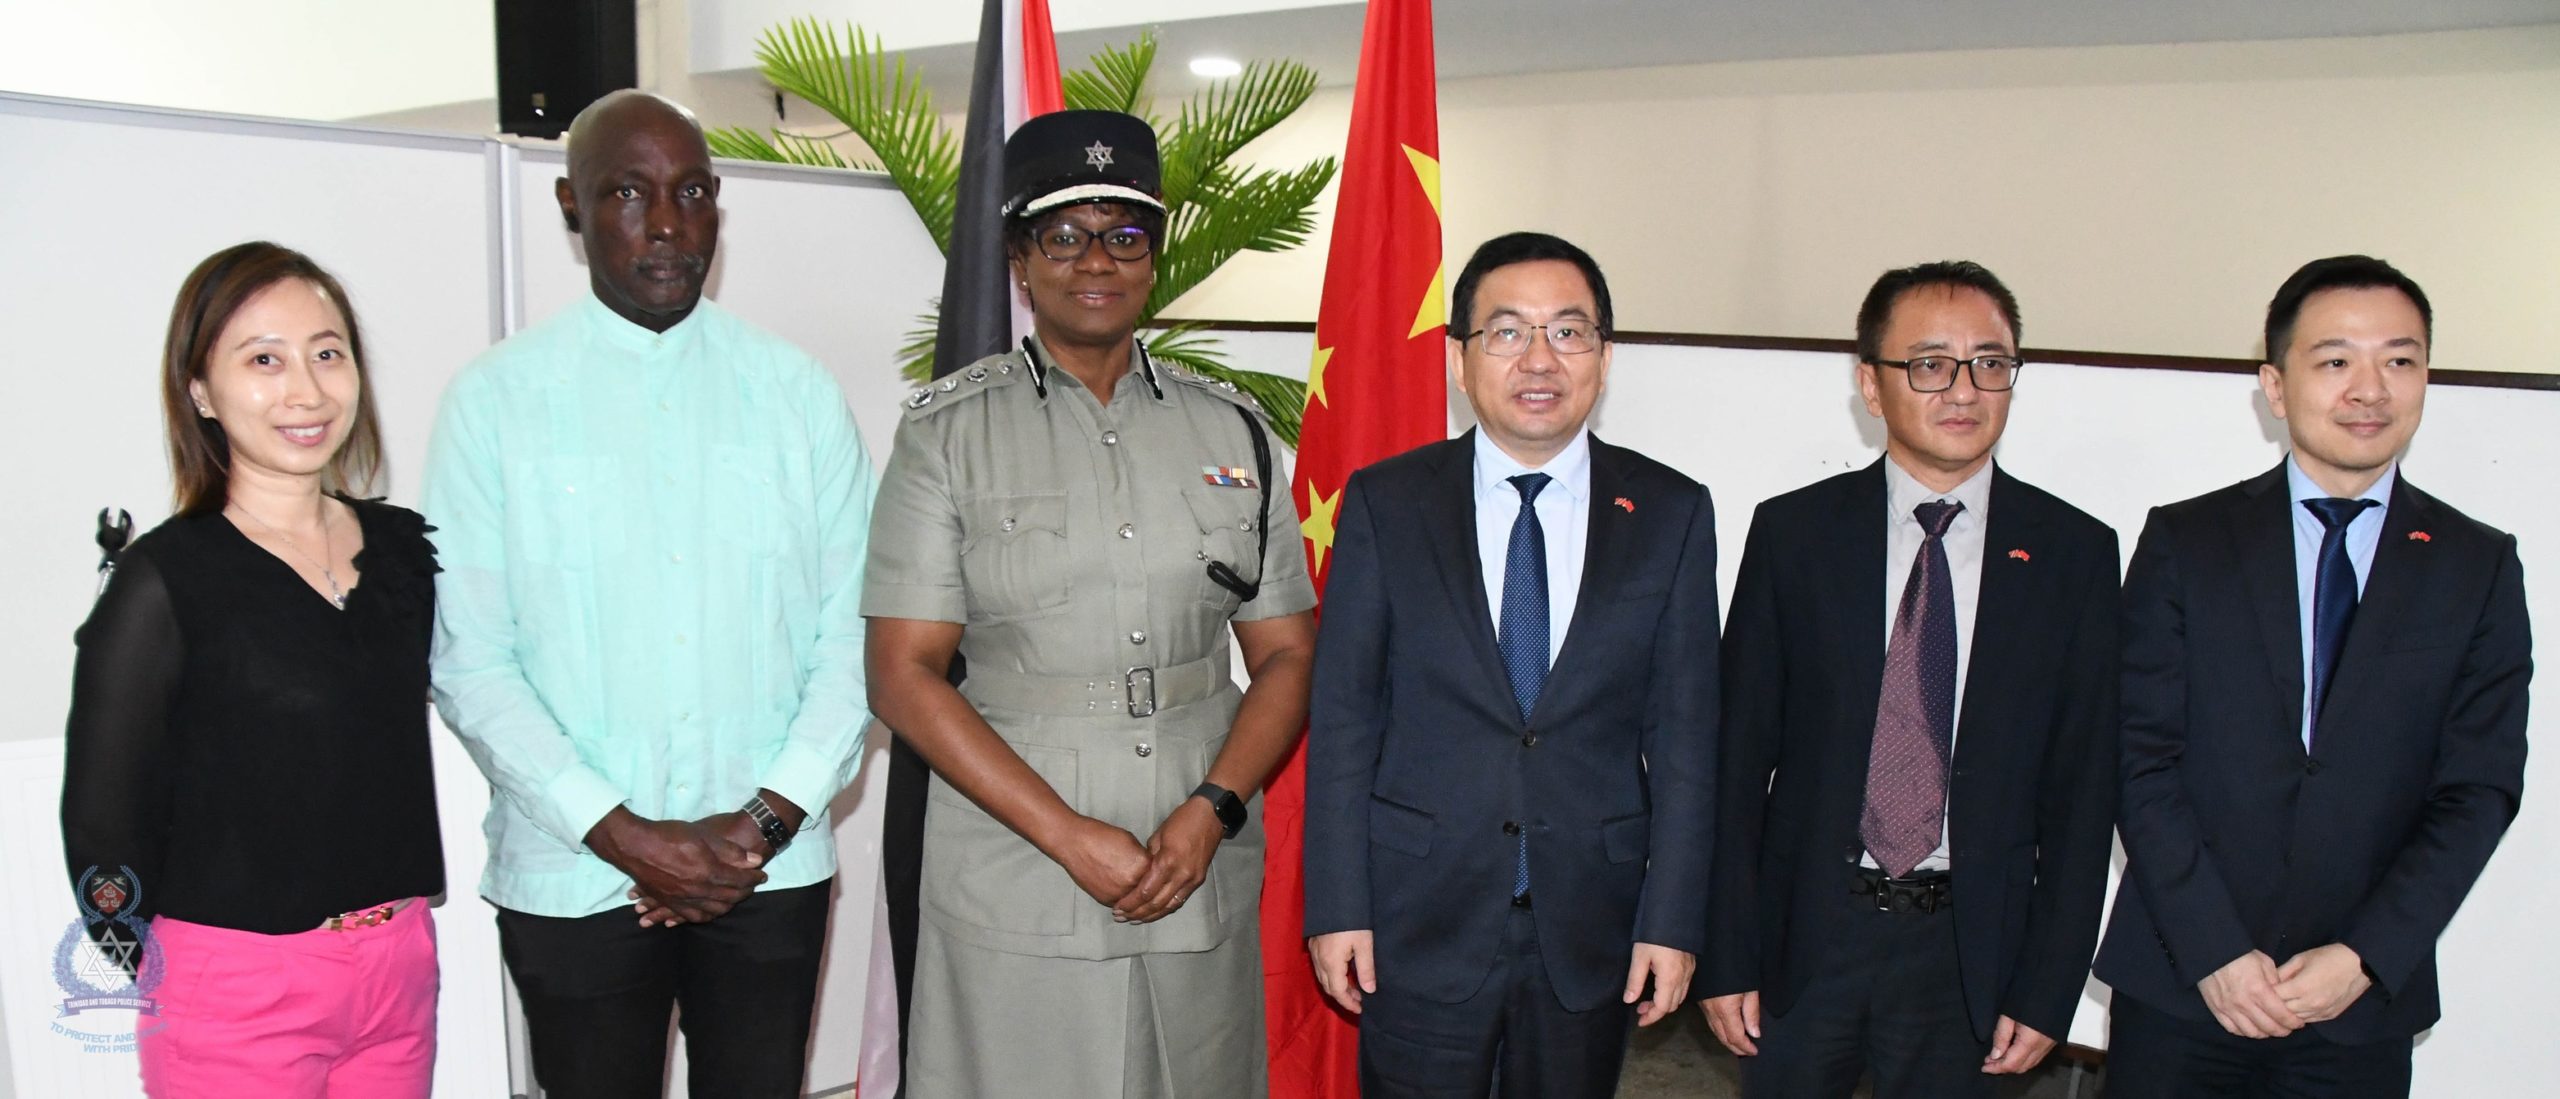 TTPS, Chinese Association partner to train 25 police officers in Mandarin